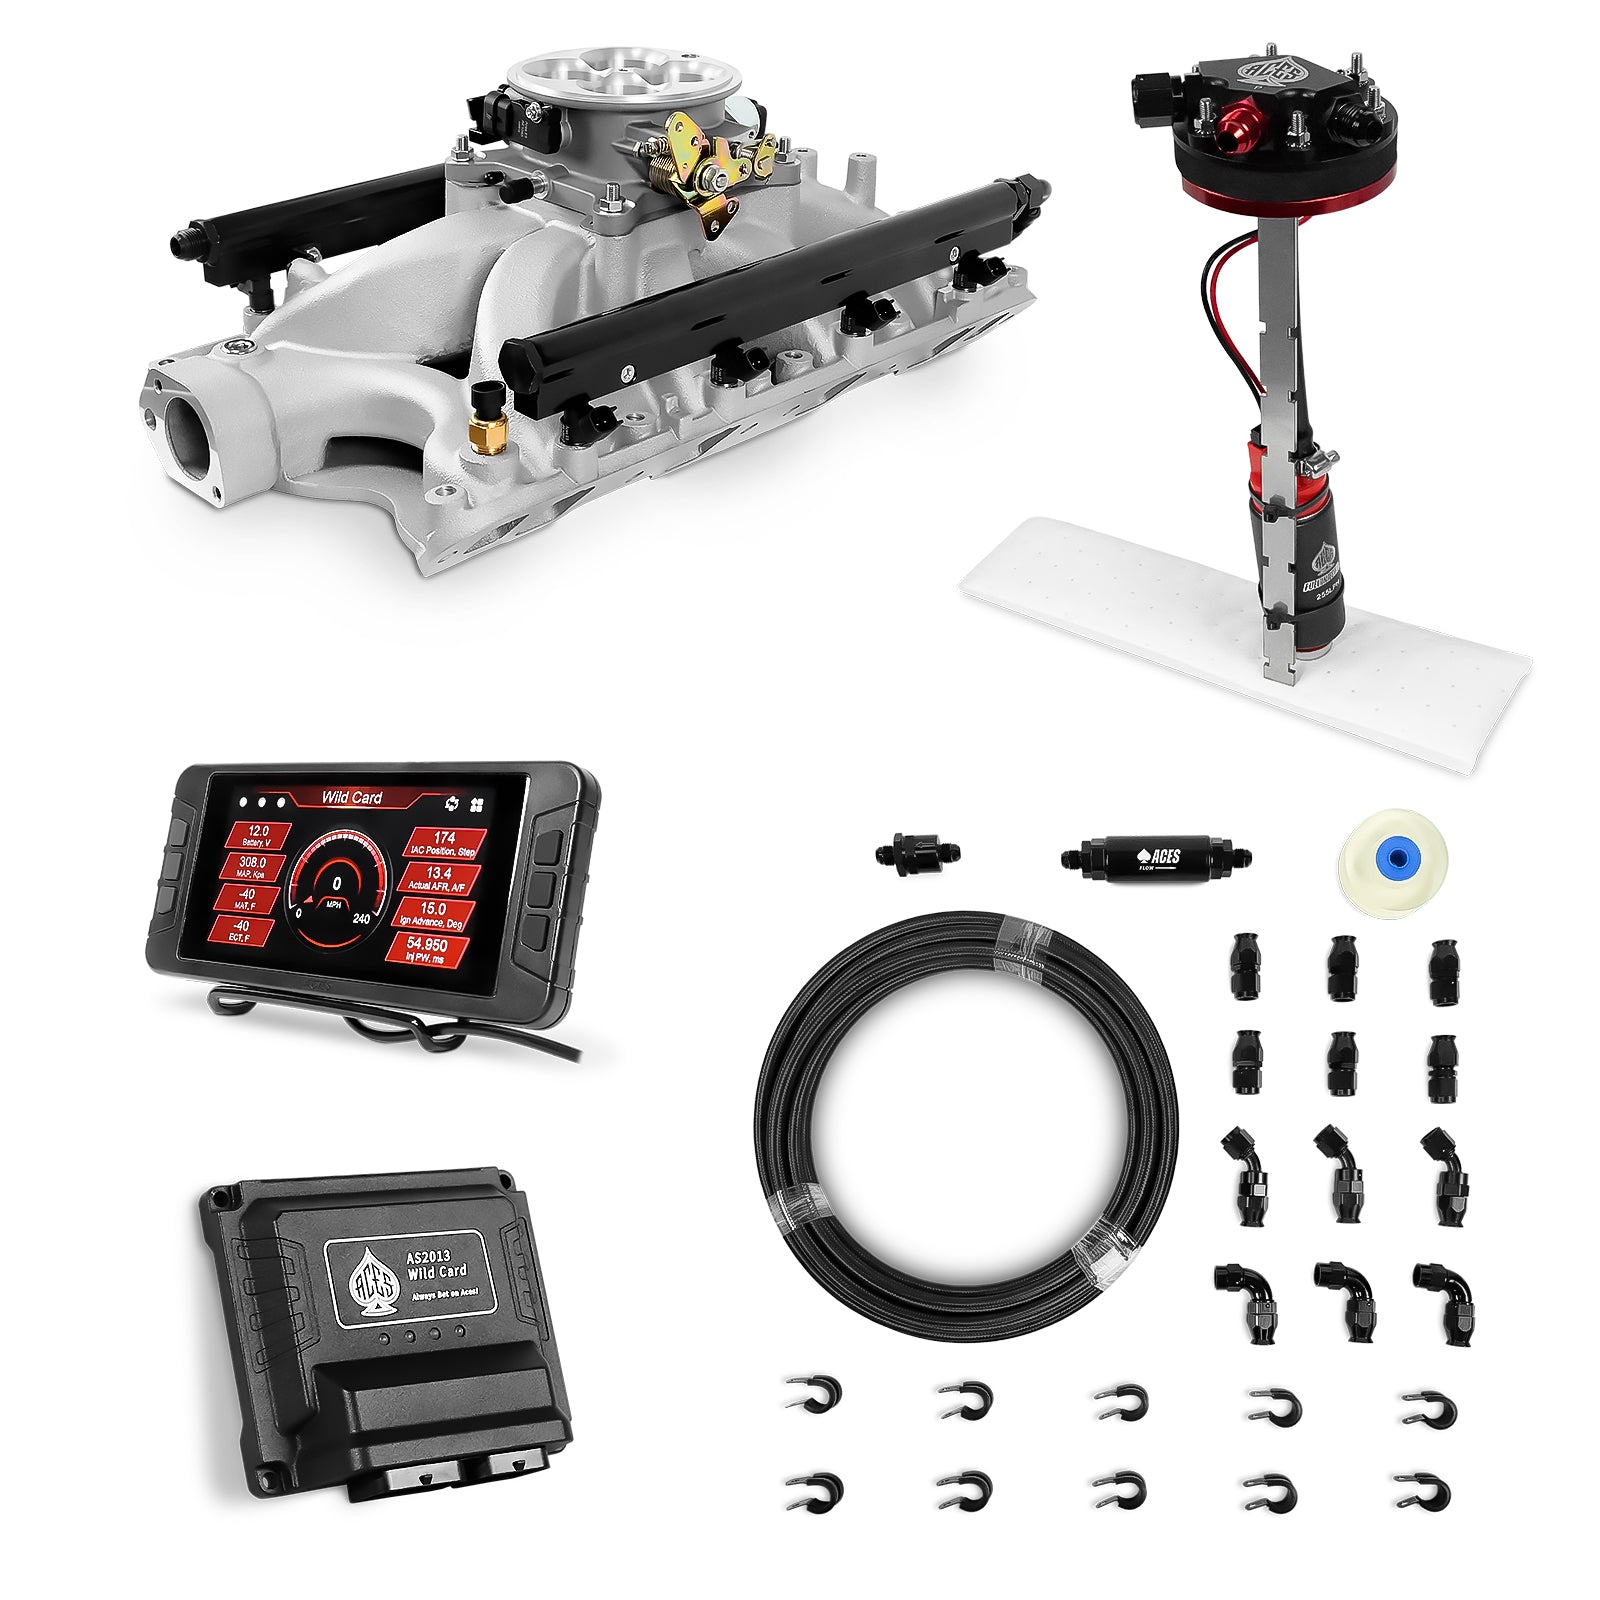 Wild Card Sequential EFI Master Kits